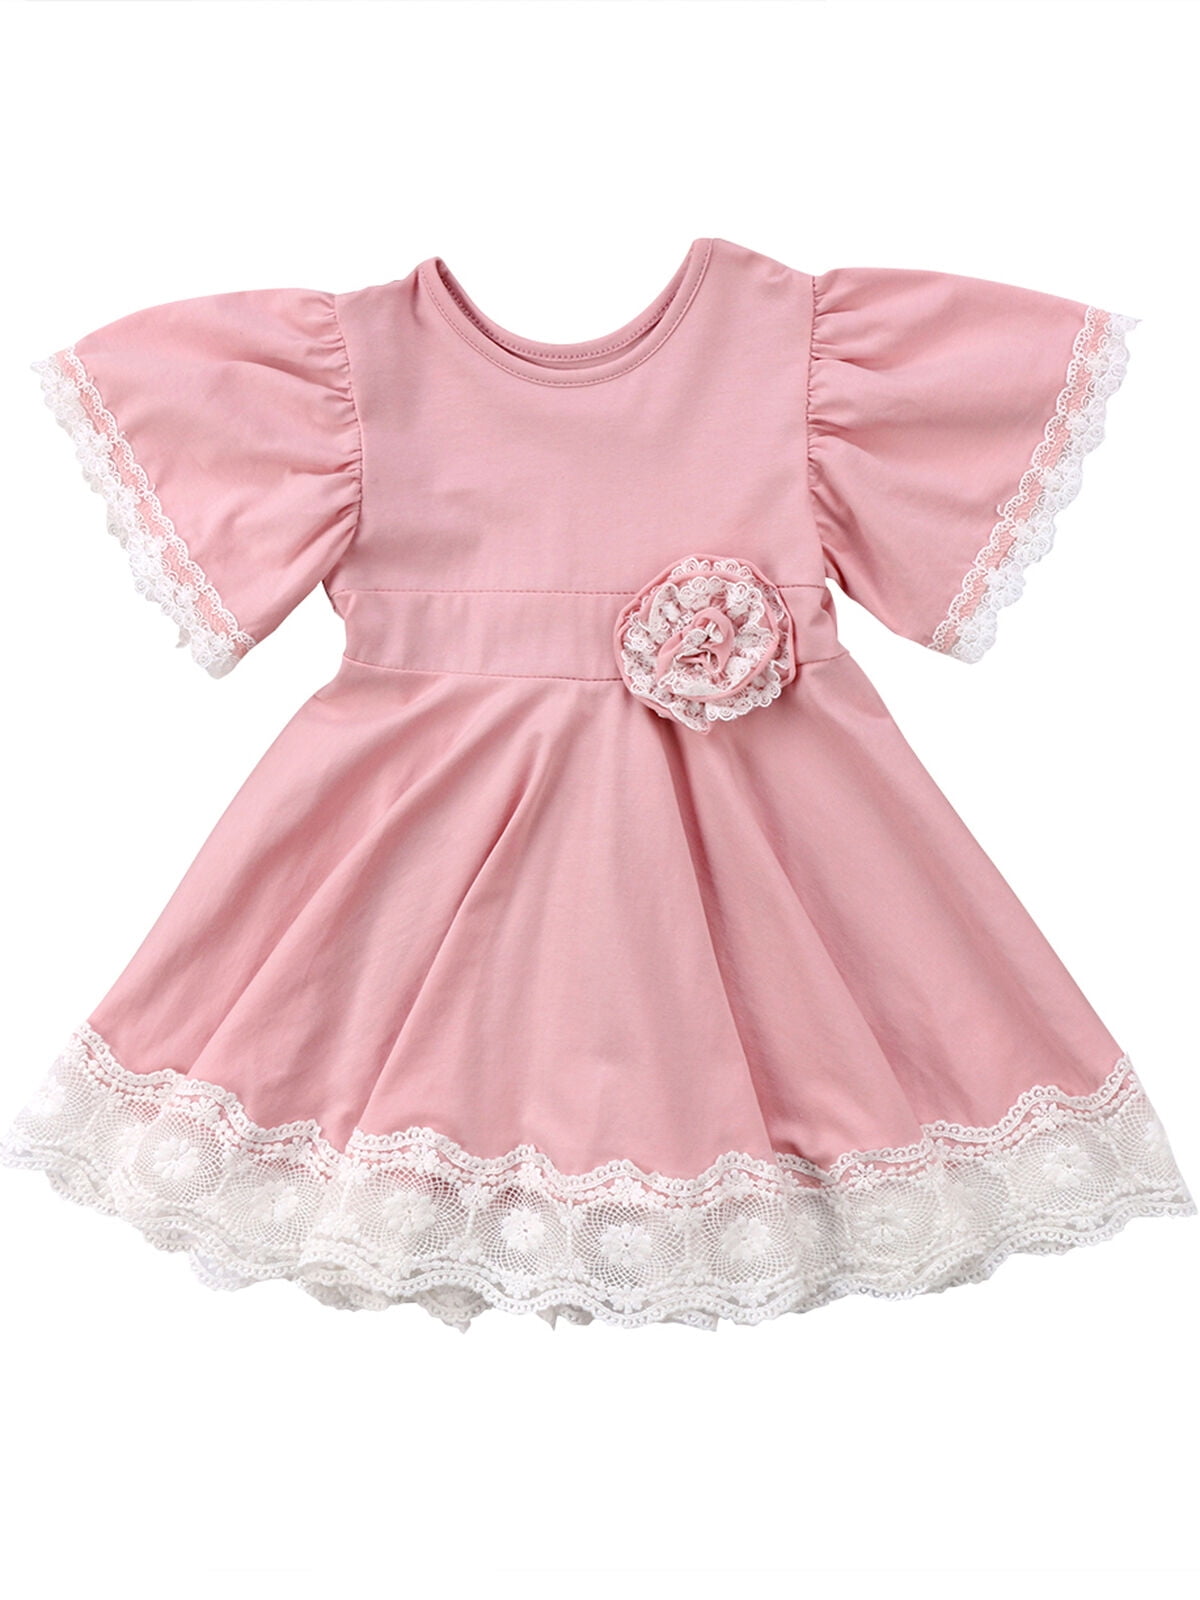 Princess Kids Baby Girls Dress Lace Floral Party Dress Easter Casual ...